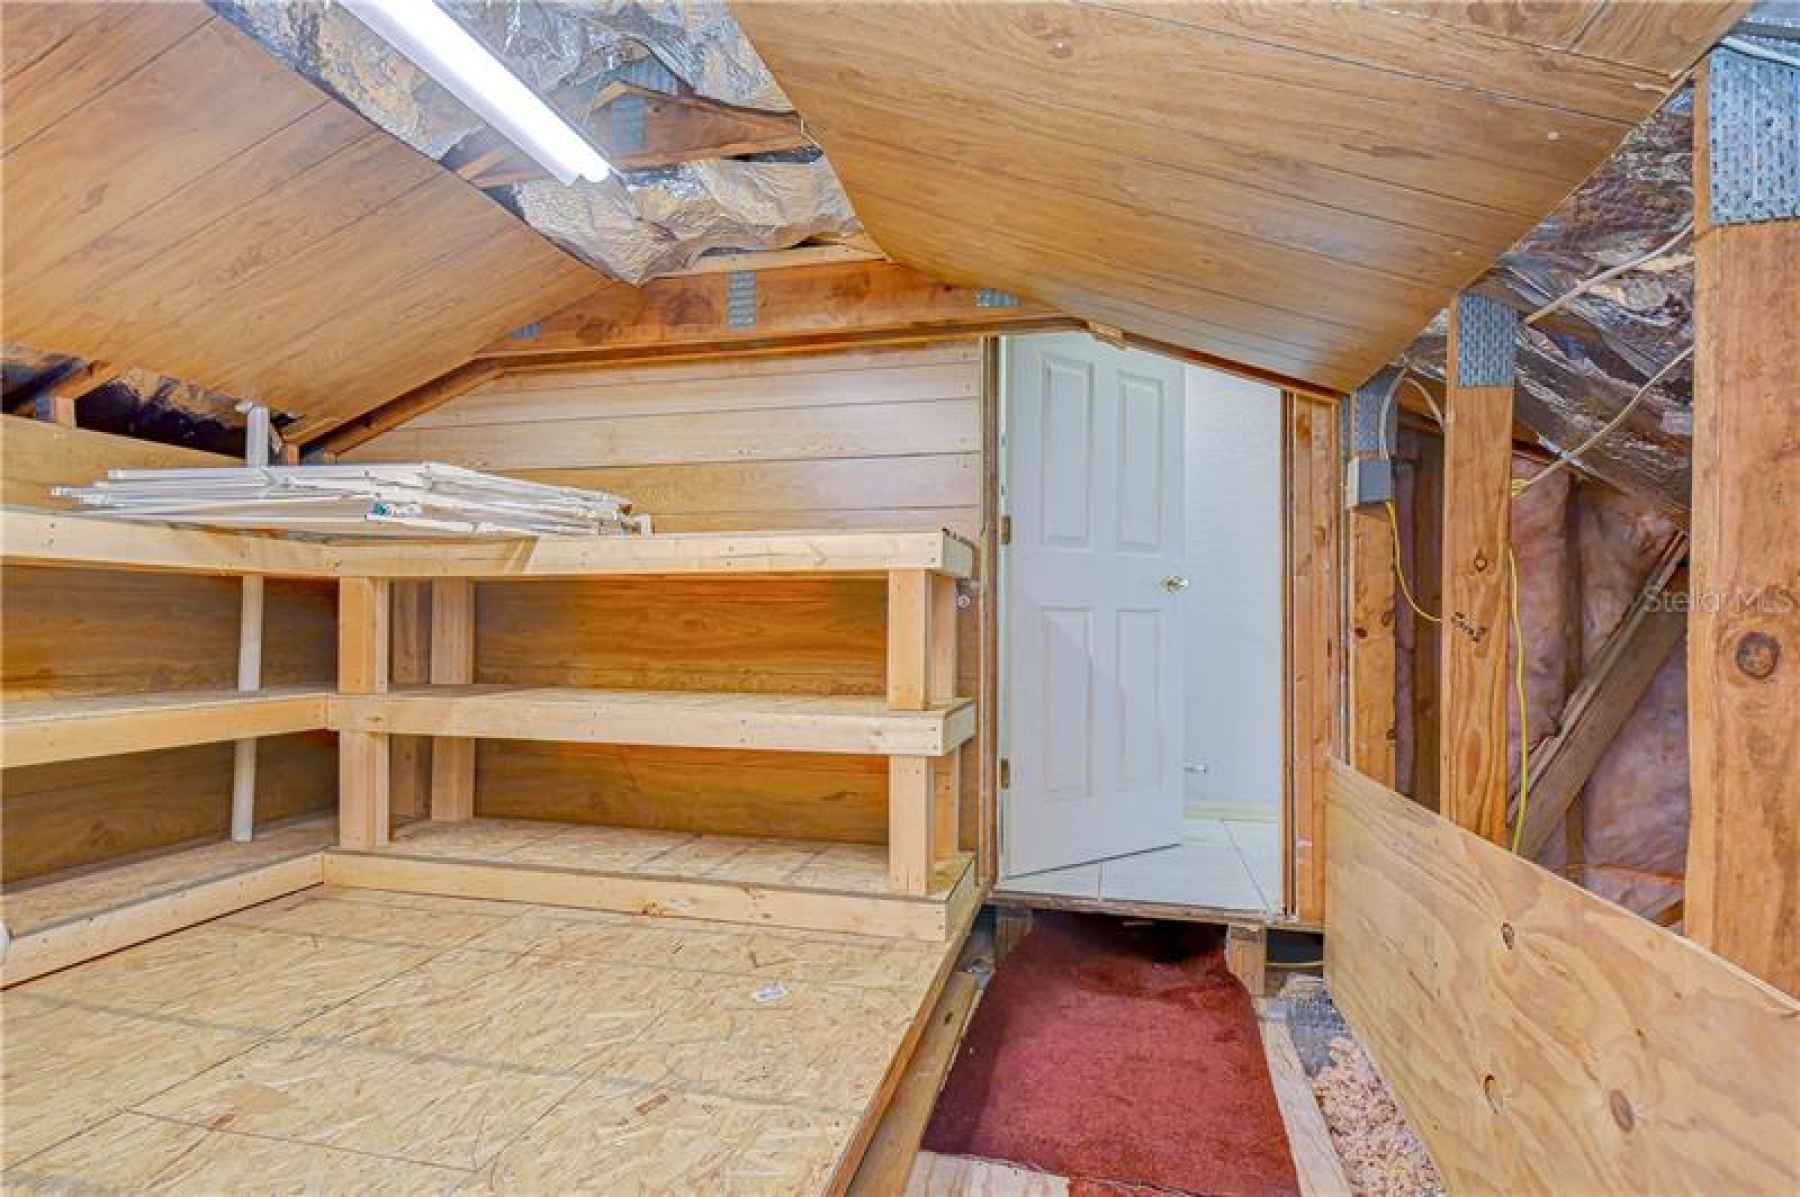 This attic is perfect for storage space!